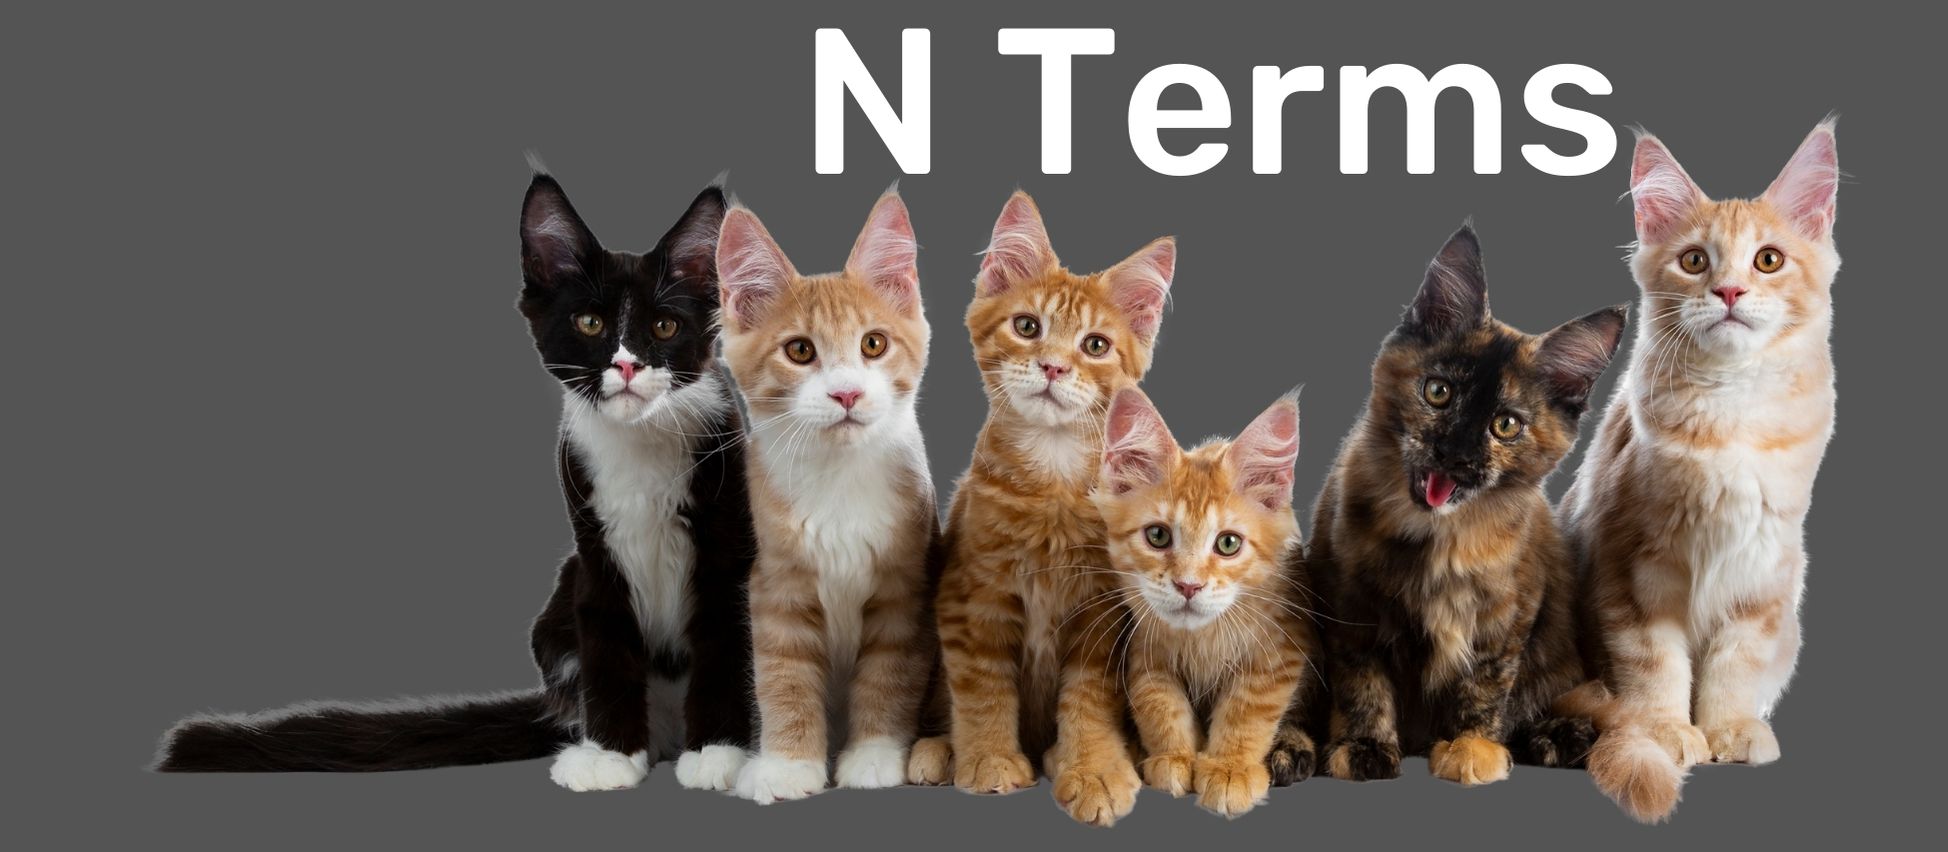 Group of six cats in front of a gray background with text reading 'N Terms' at the top to indicate a new section of the glossary